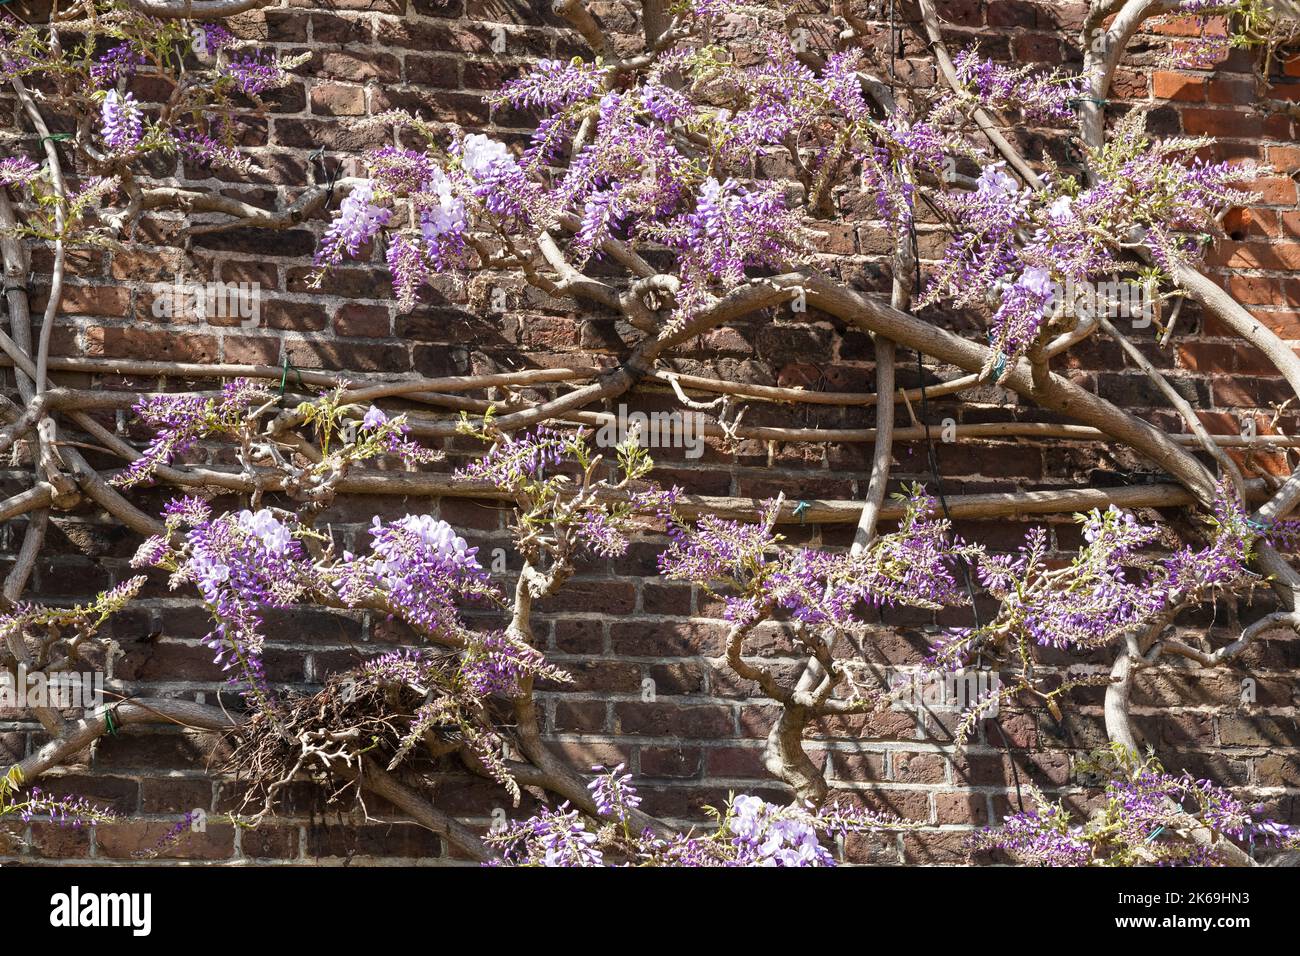 Purple flowers of Wisteria plant bloomimg in a garden Stock Photo